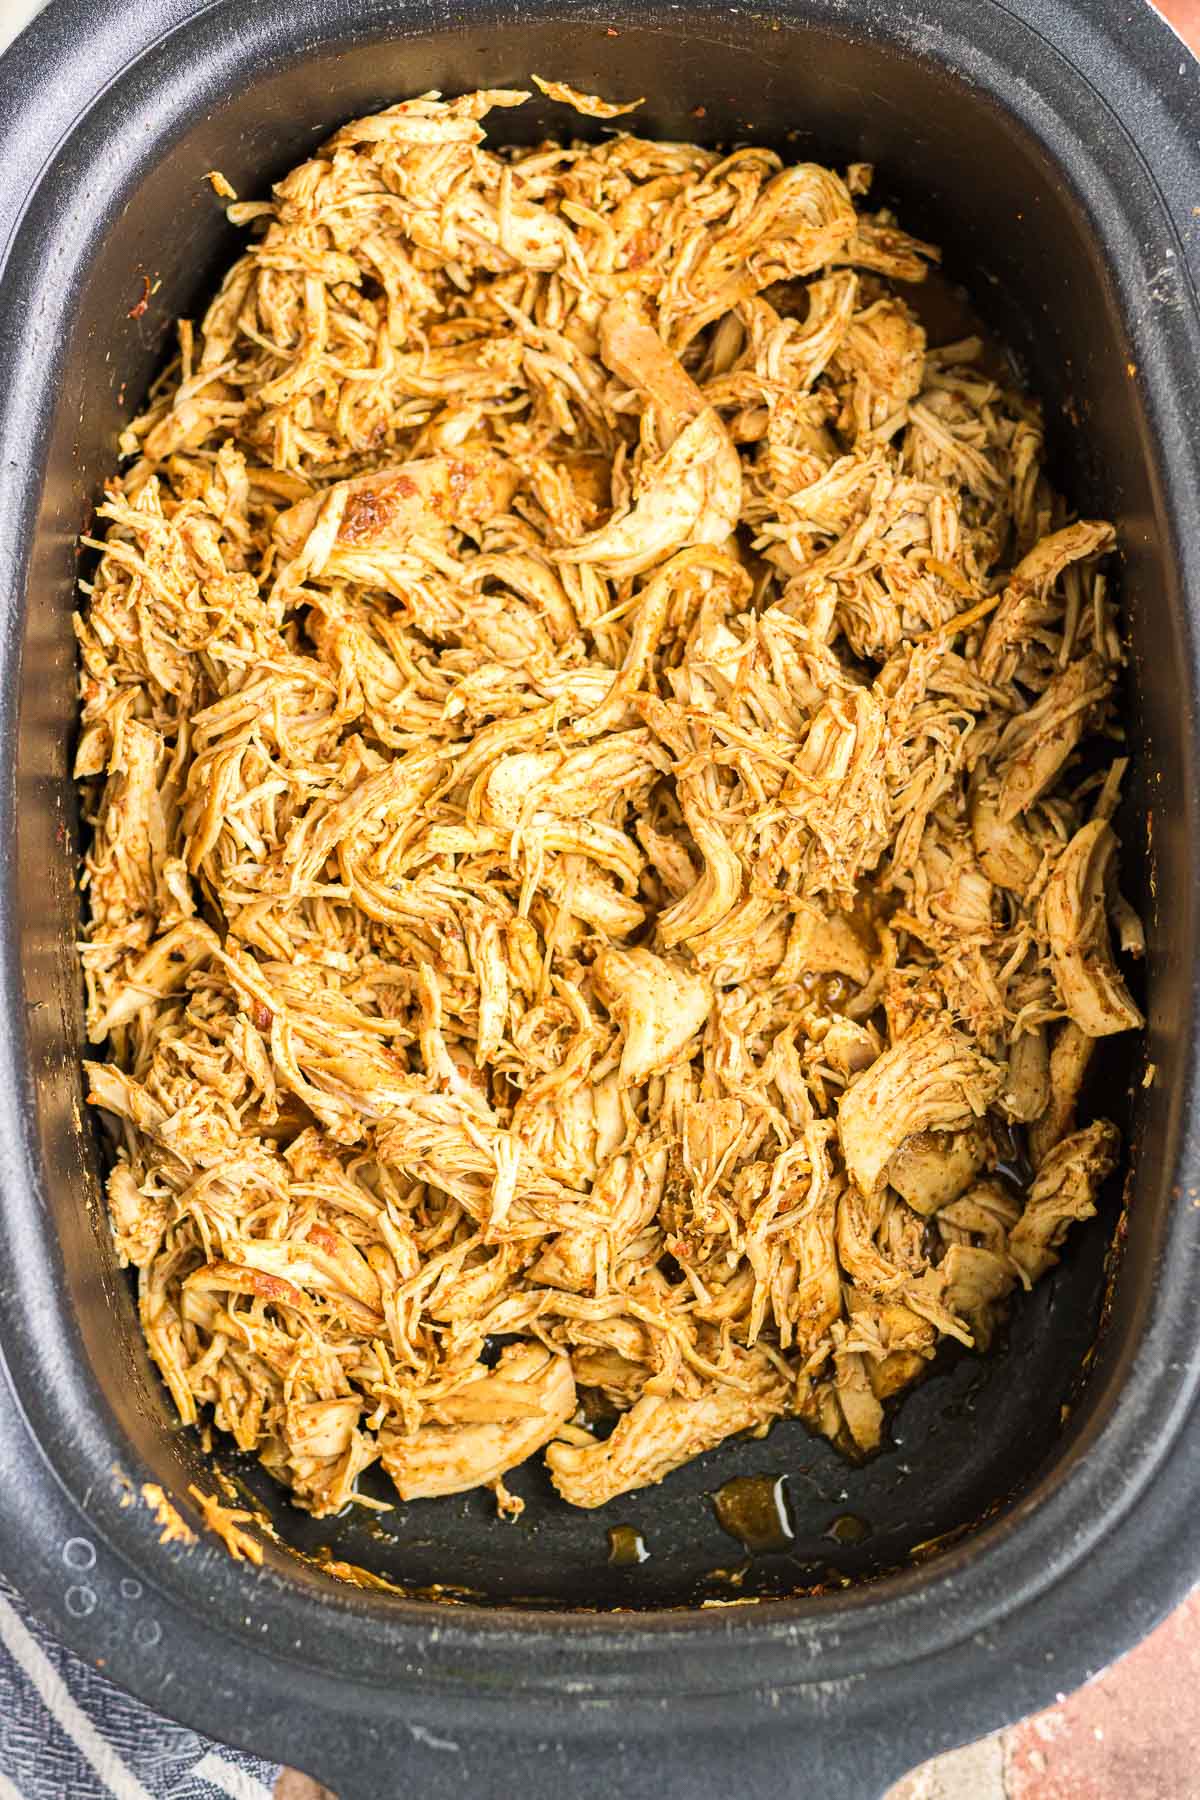 Cooked and shredded chicken in crockpot.